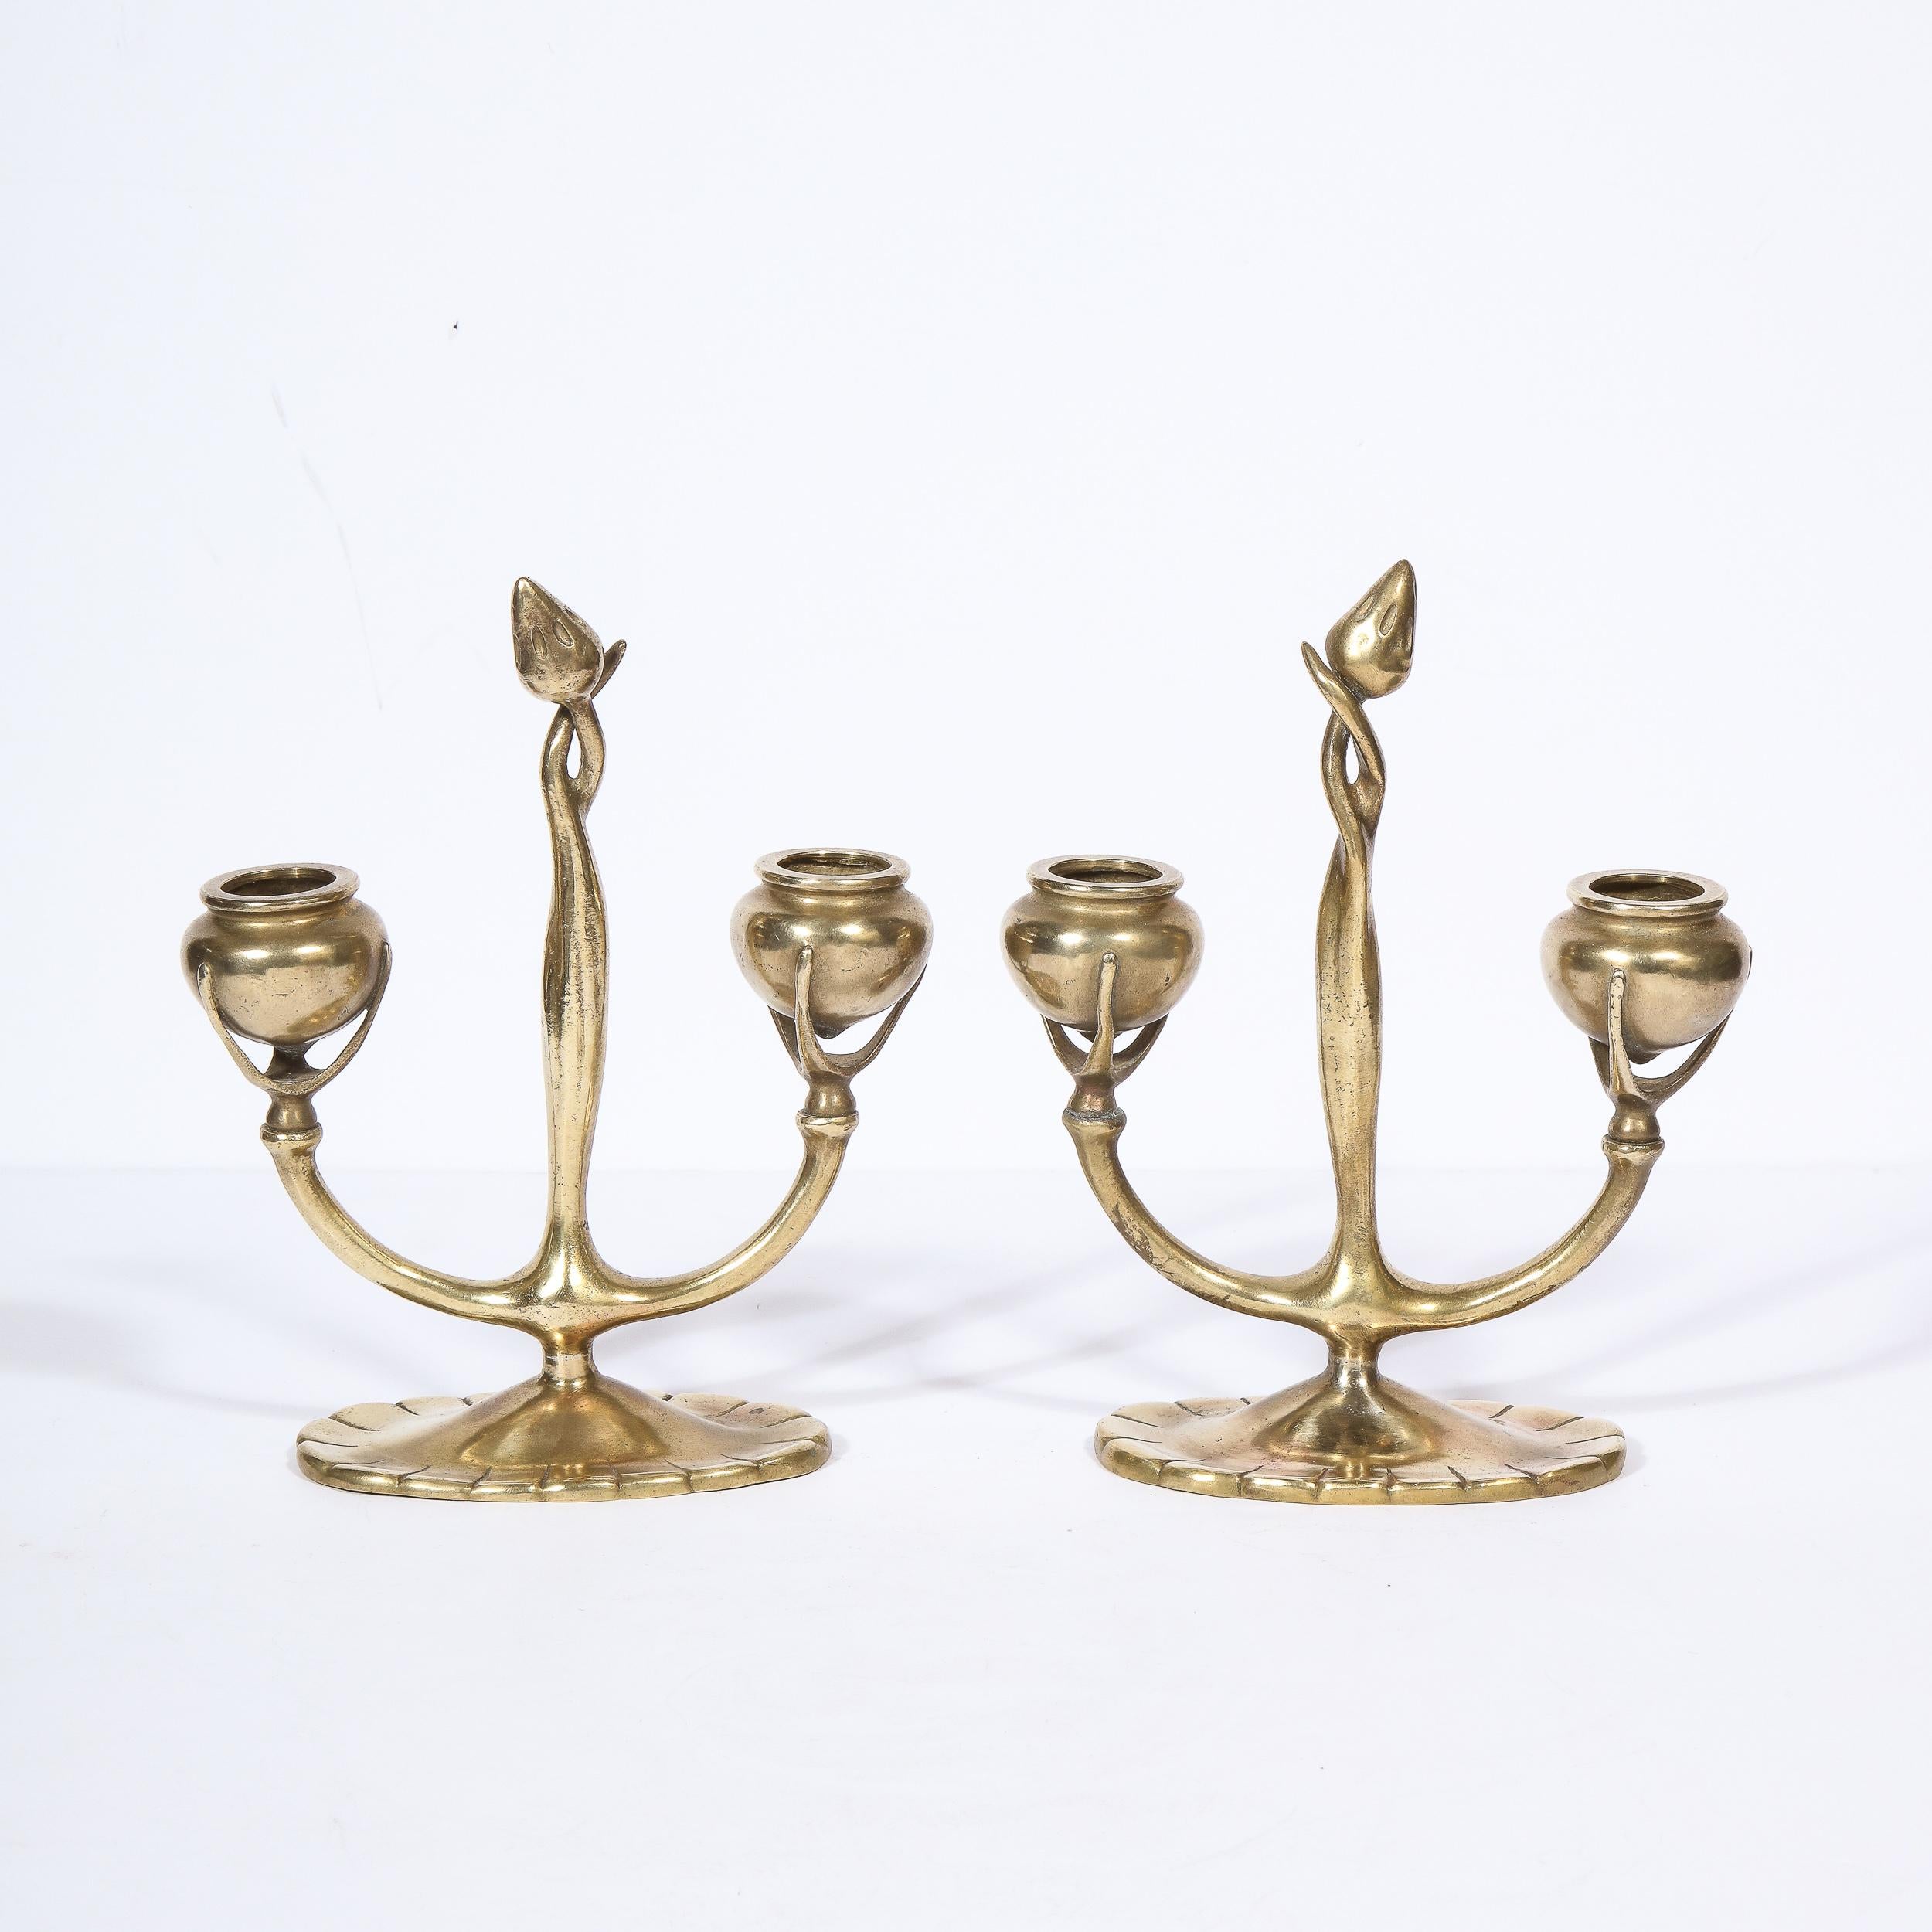 This stunning pair of bronze Art Nouveau candelabras were realized in the United States circa 1910 by Tiffany Studios- one of America's finest luxury goods companies since 1837. They feature graphic and sculptural forms consisting of two urn form